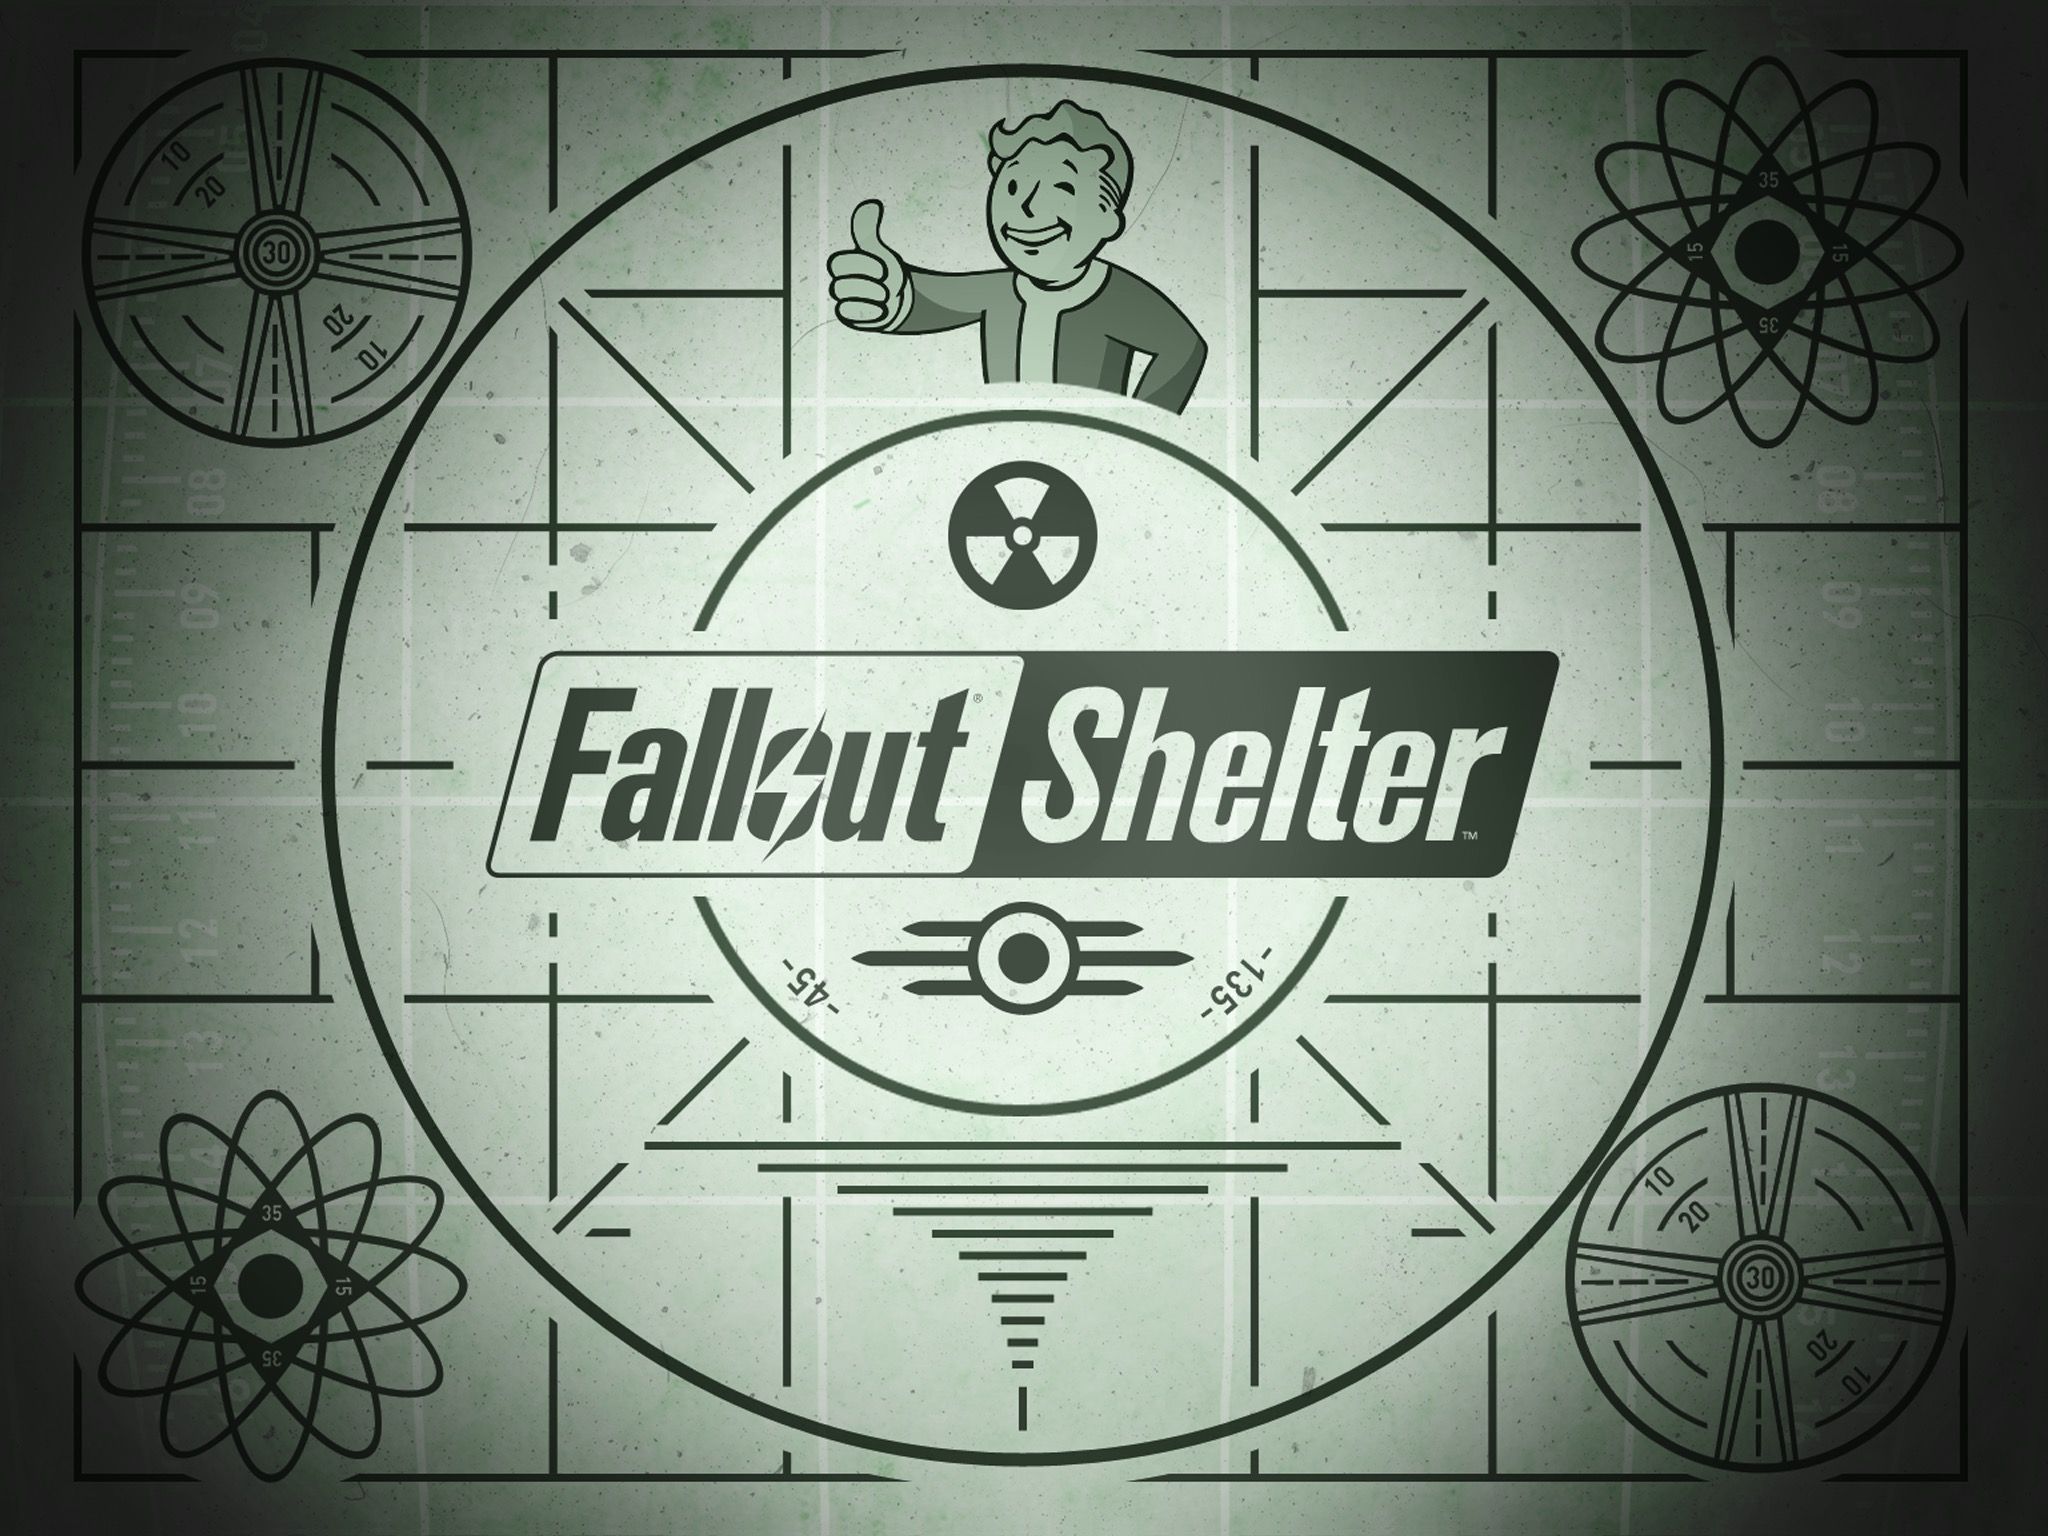 fallout please stand by 900x480